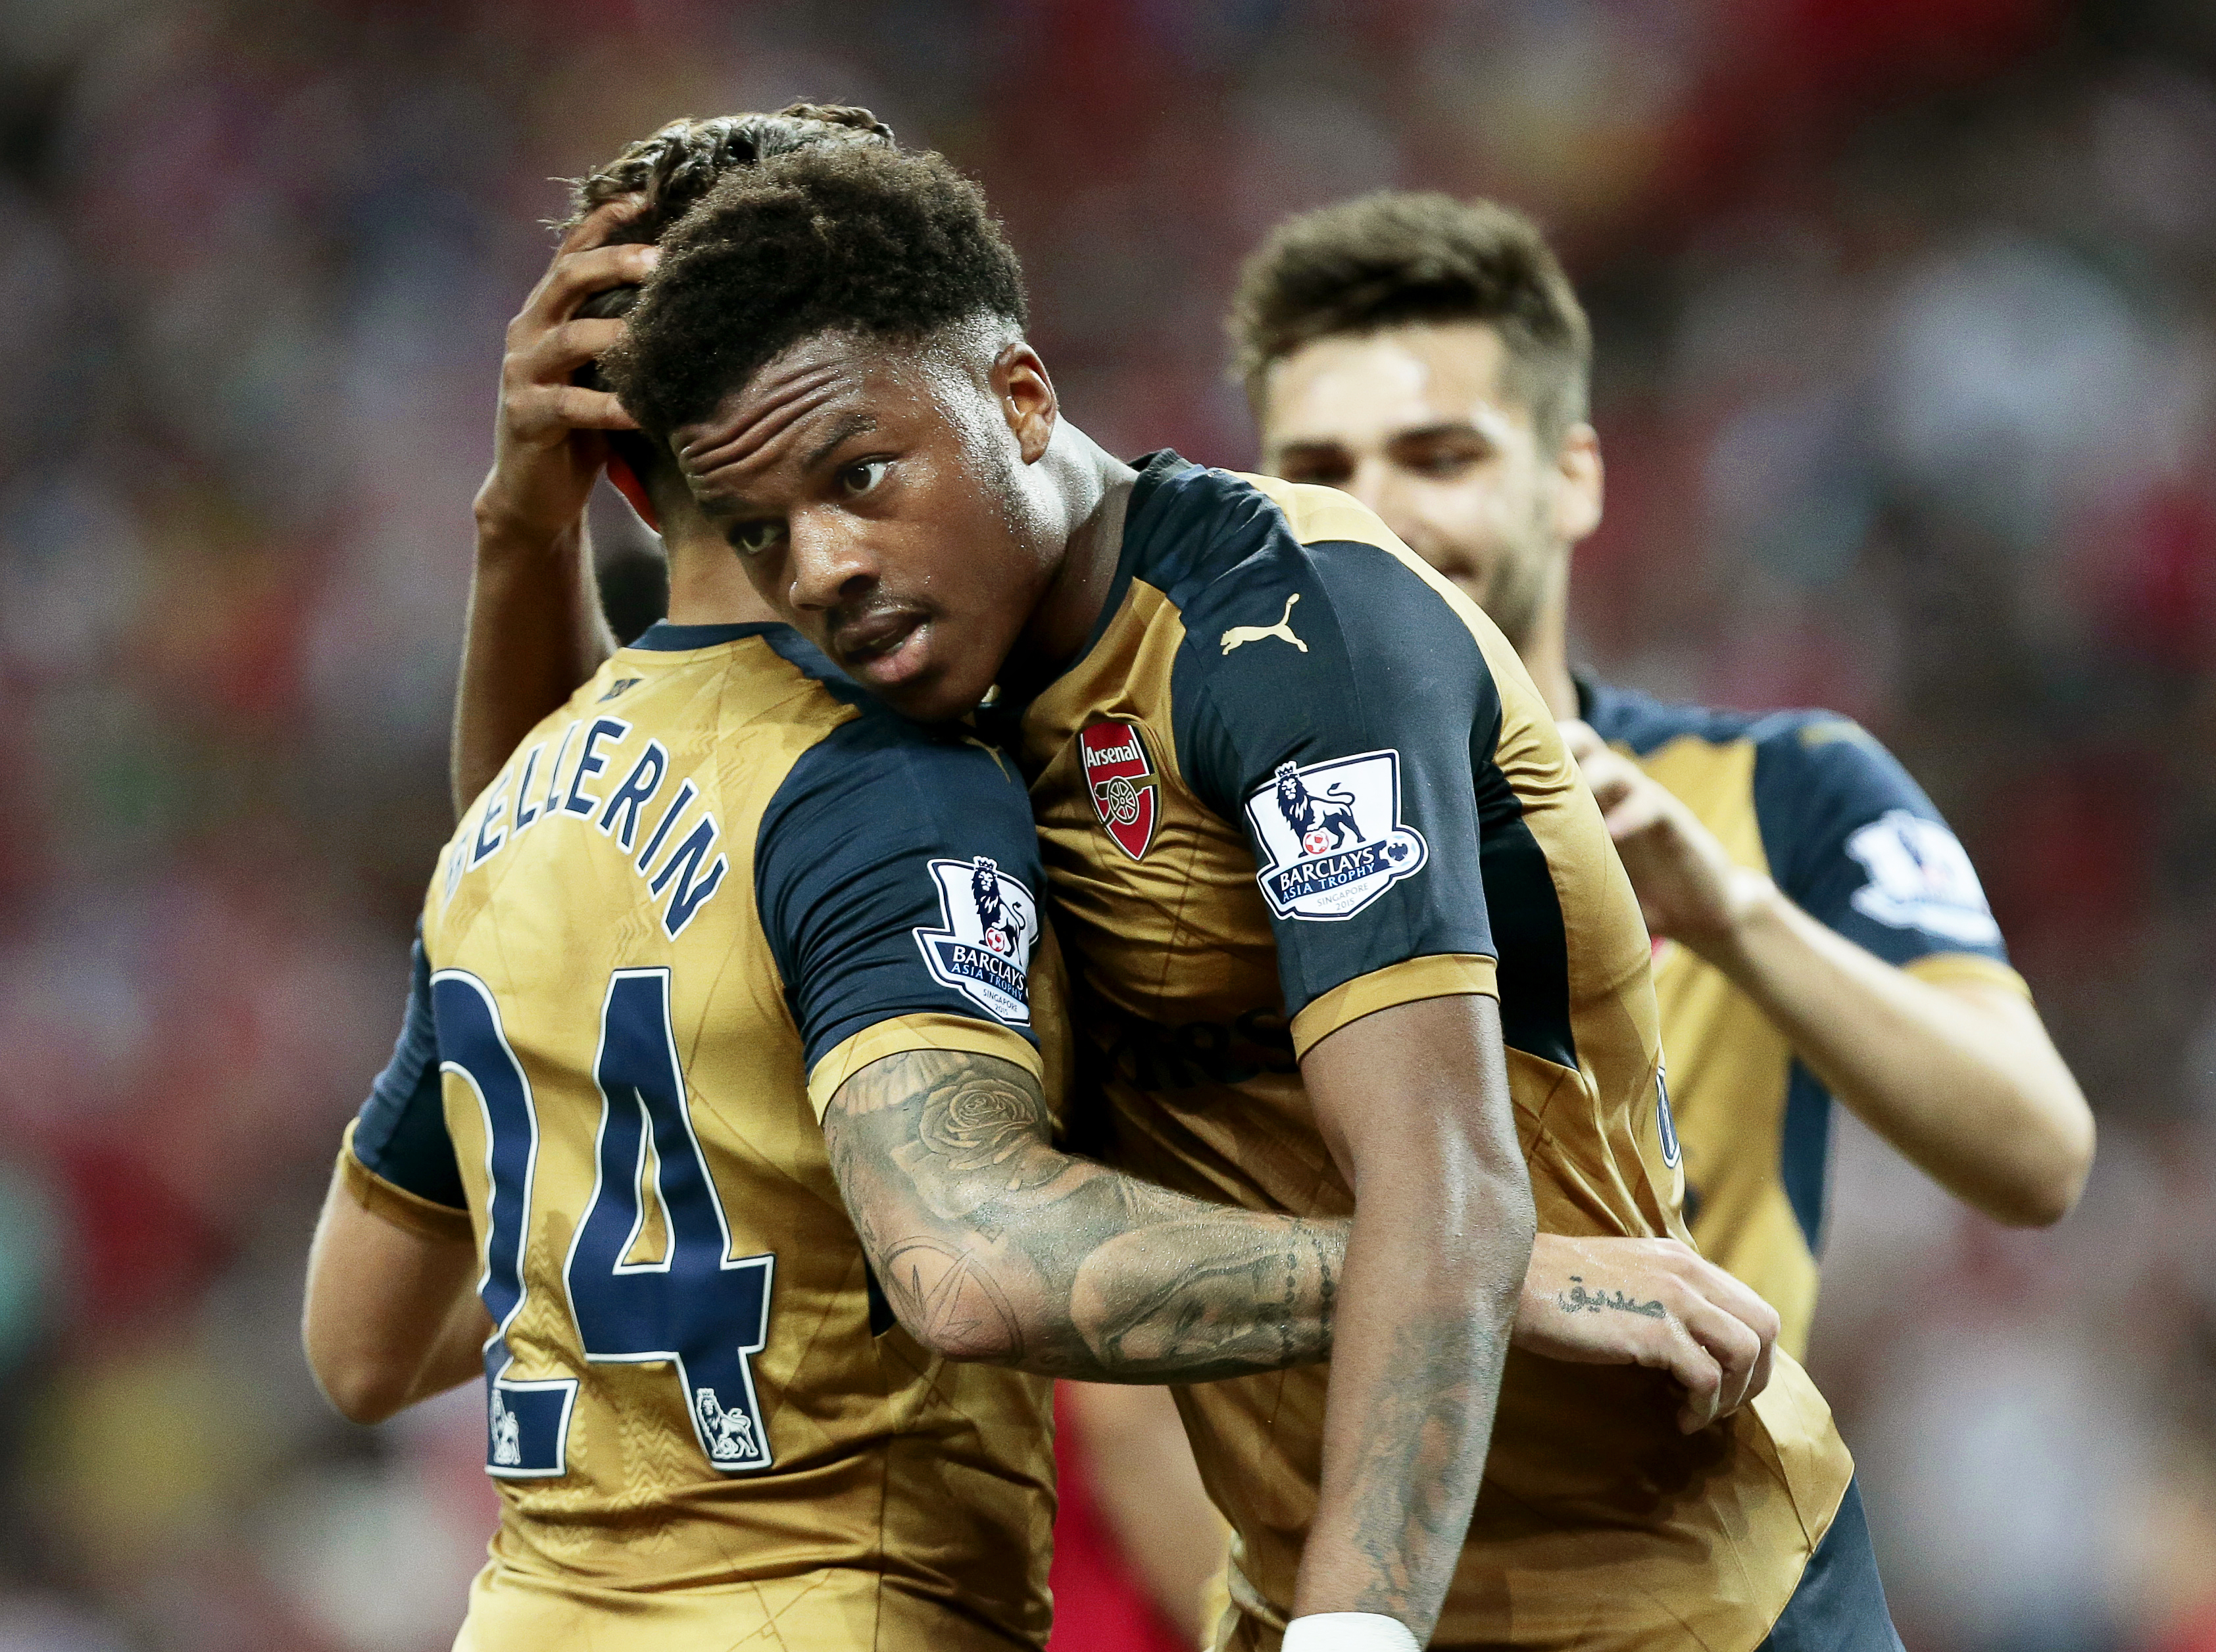 epa04847847 Arsenal forward Chuba Akpom (C) celebrates with his teammates Hector Bellerin (L) and Jon Toral (R) after scoring a hattrick during the Barclays Asia Trophy soccer match between Arsenal FC and a Singapore Selection at the National Stadium in Singapore, 15 July 2015. The Barclays Asia Trophy takes place on 15 and 18 July 2015 involving English Premier League teams Arsenal, Everton, and Stoke City and a Singapore Selection team.  EPA/WALLACE WOON